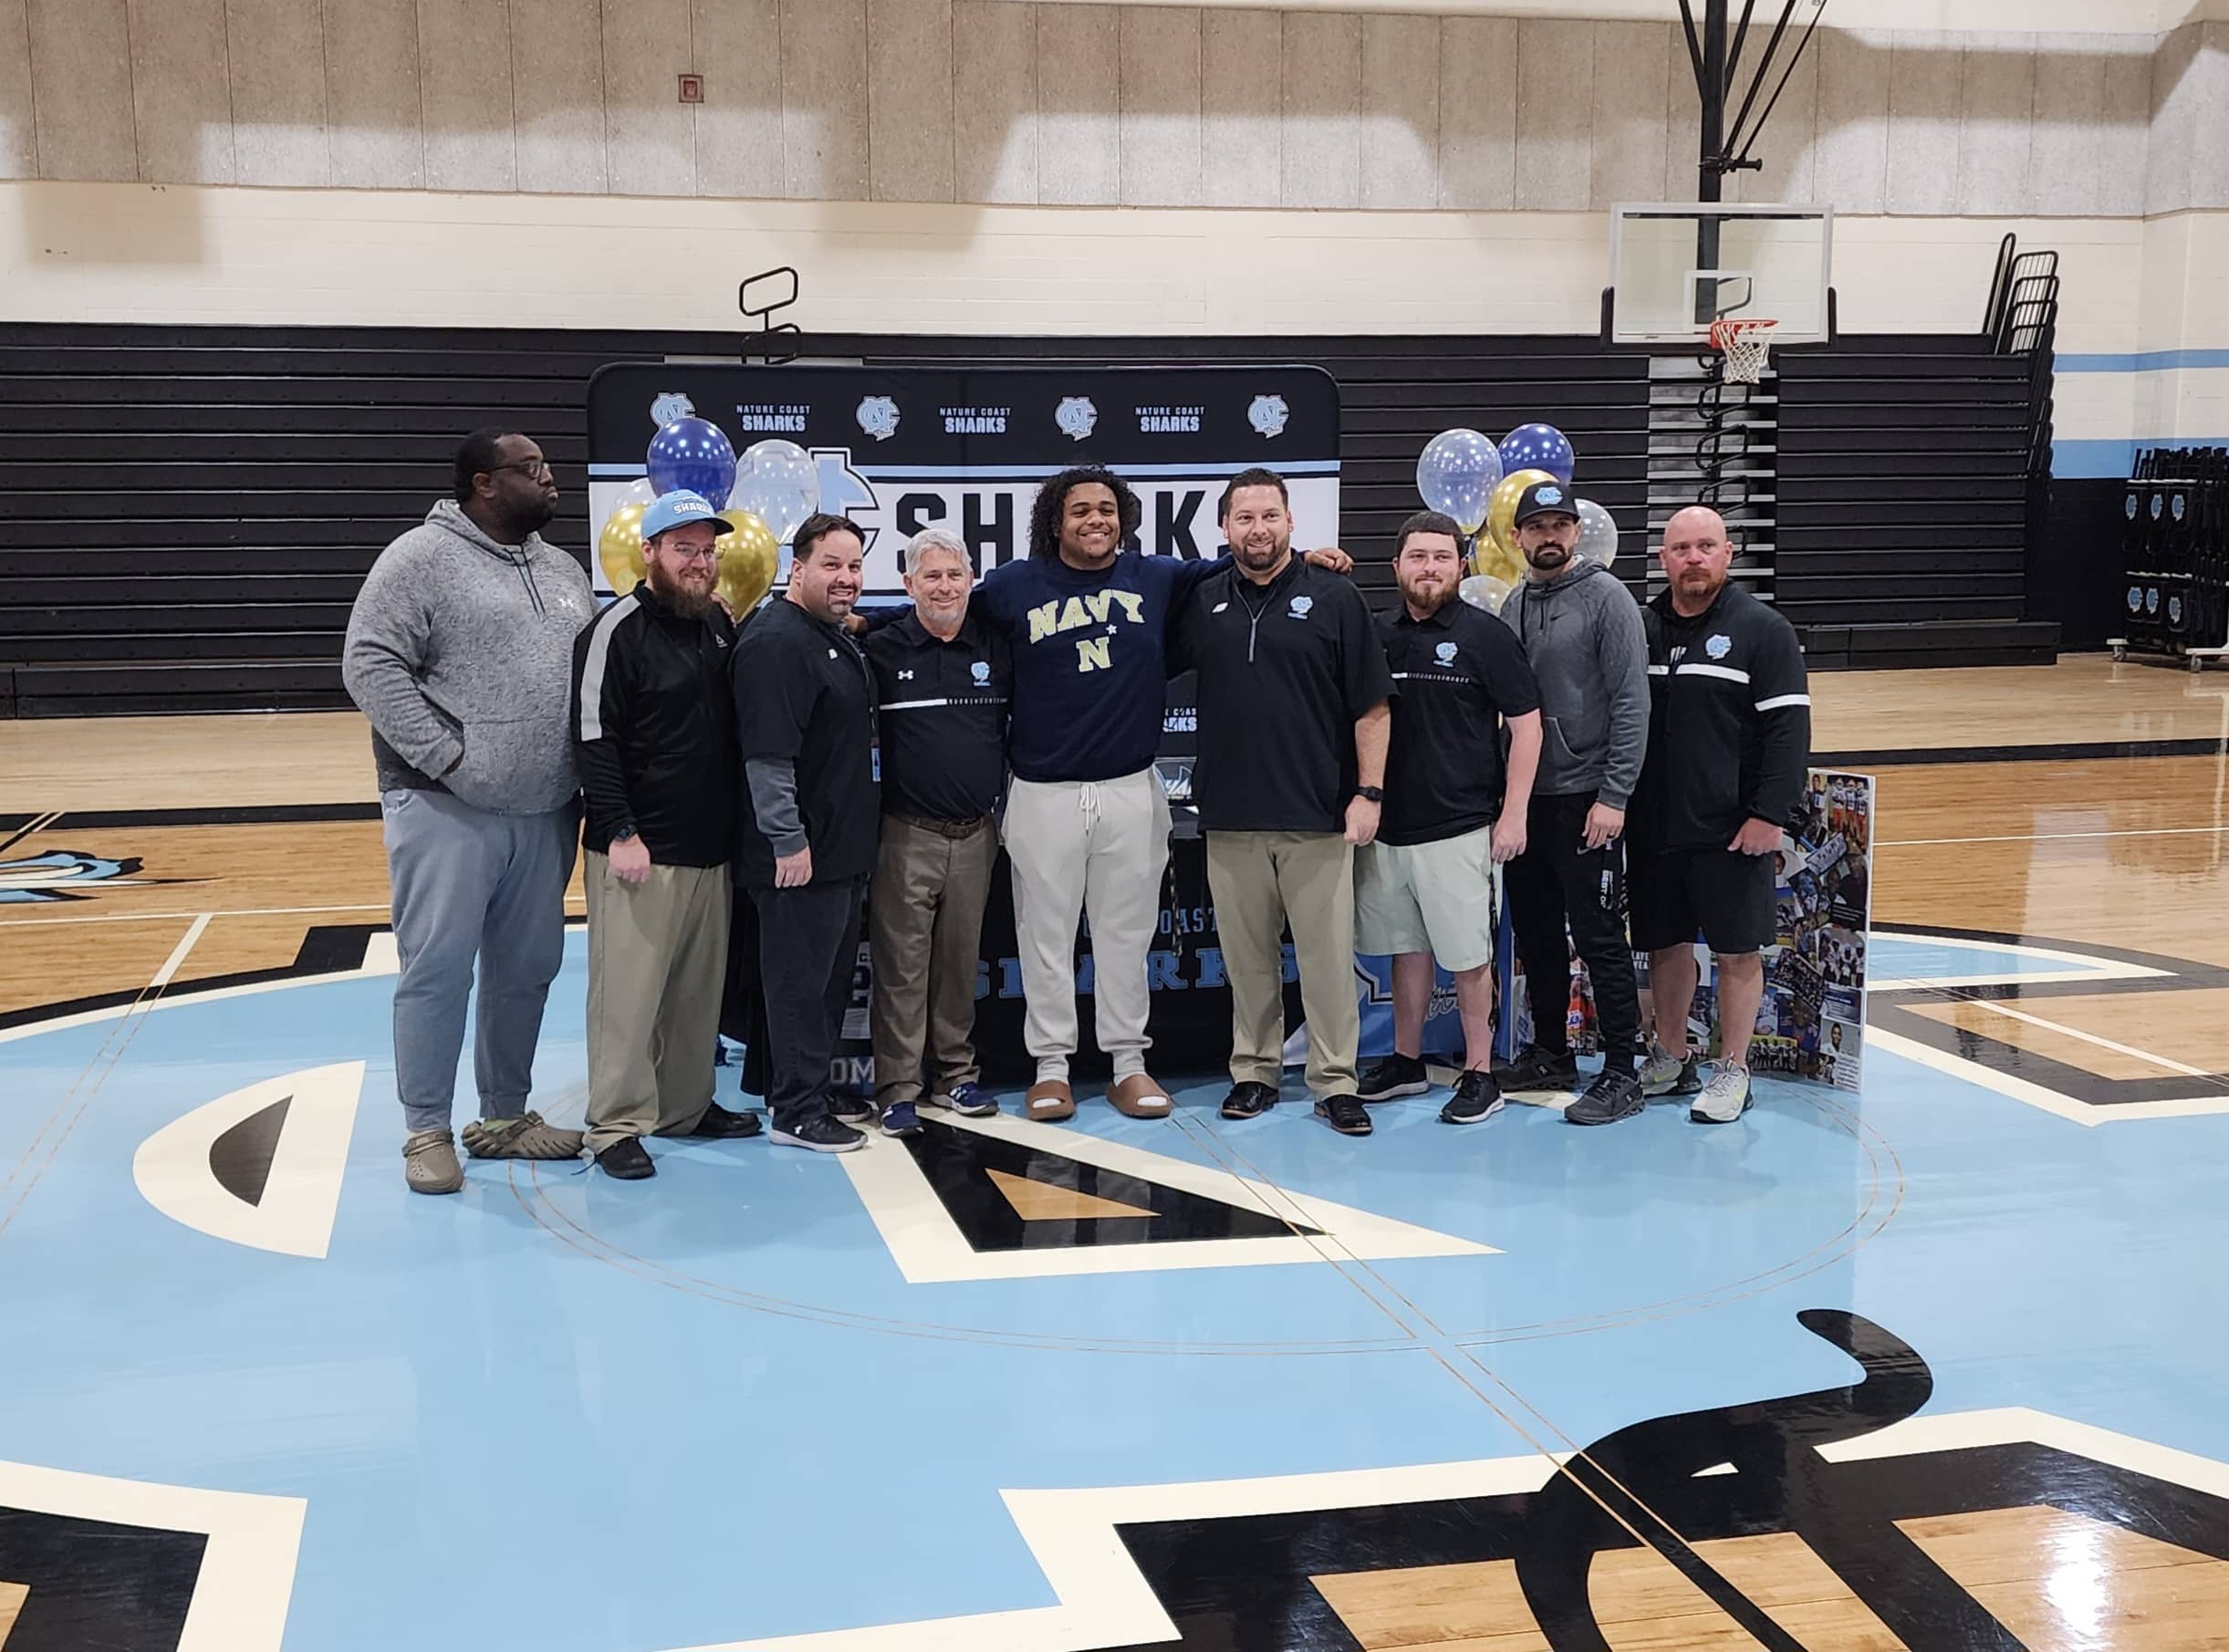 Christian Cromer poses for pictures with Coach Robert Kazmier and the rest of the football staff on signing day. [Credit: A. Szempruch]